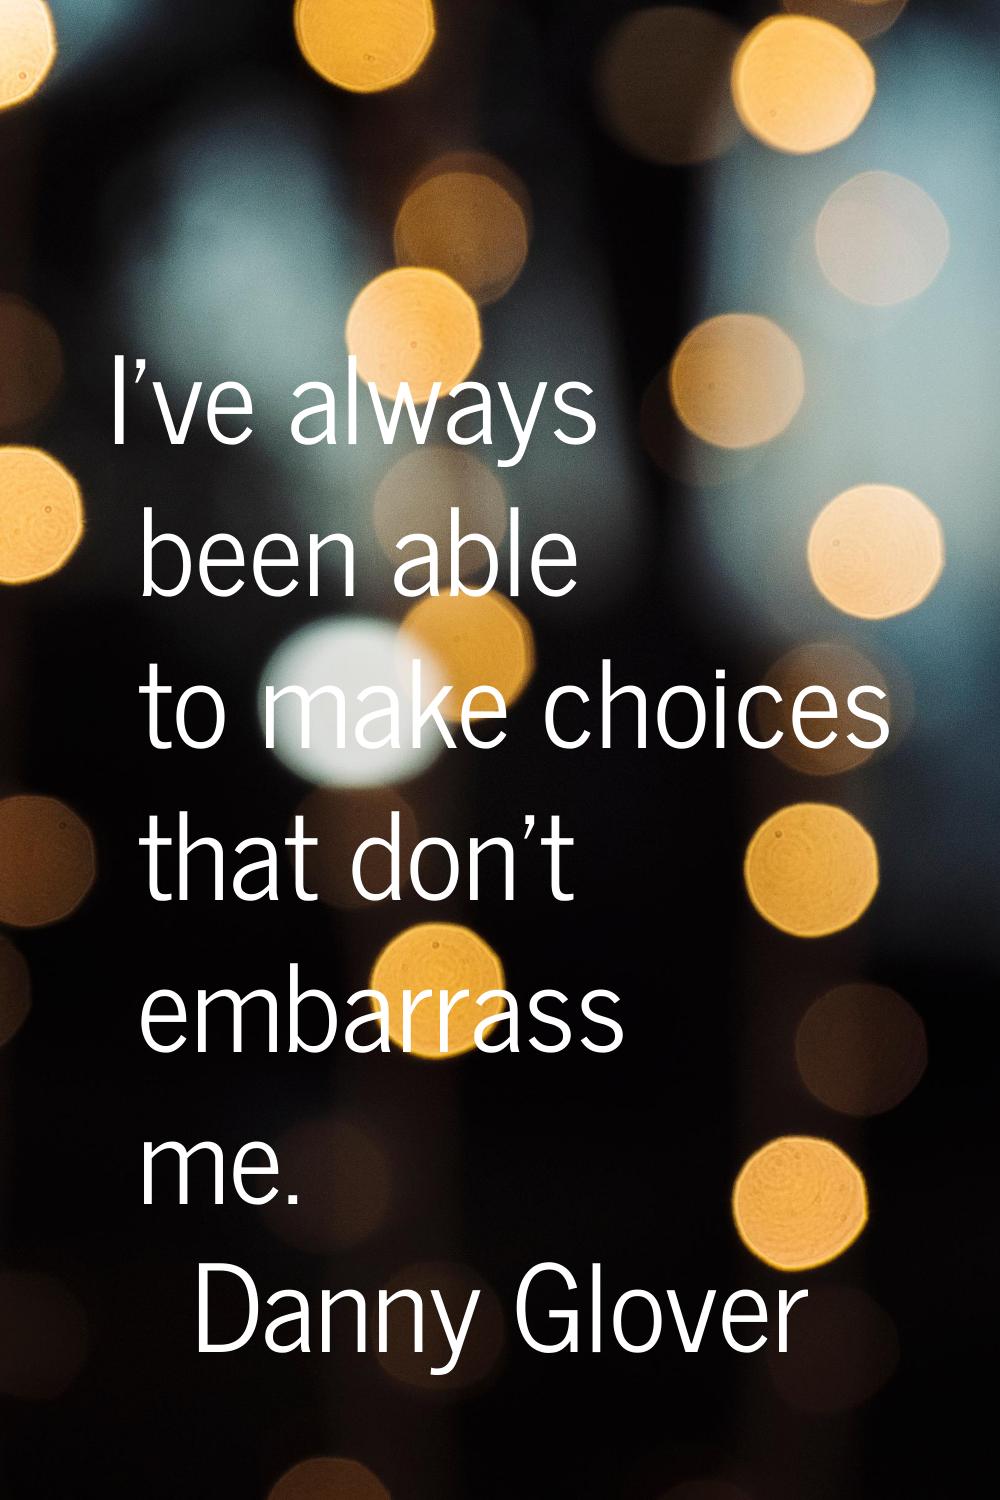 I've always been able to make choices that don't embarrass me.